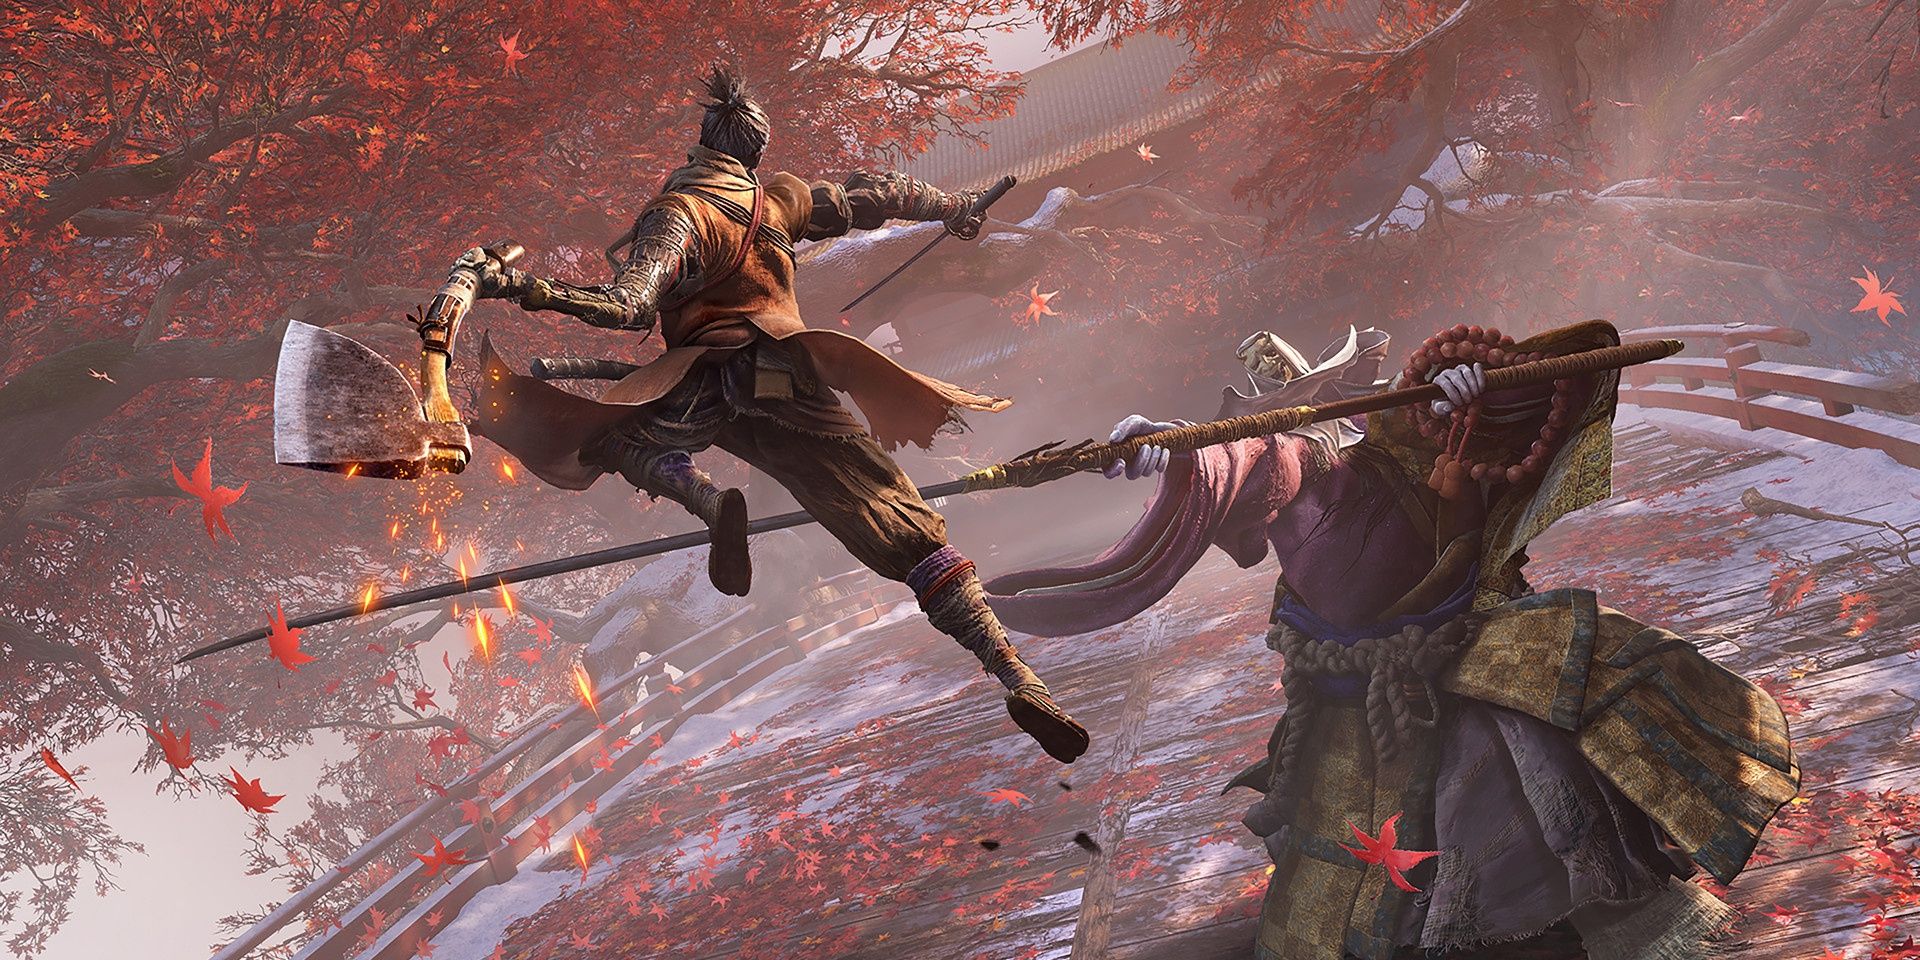 The Wolf Fighting An Enemy From Sekiro - Shadows Die Twice